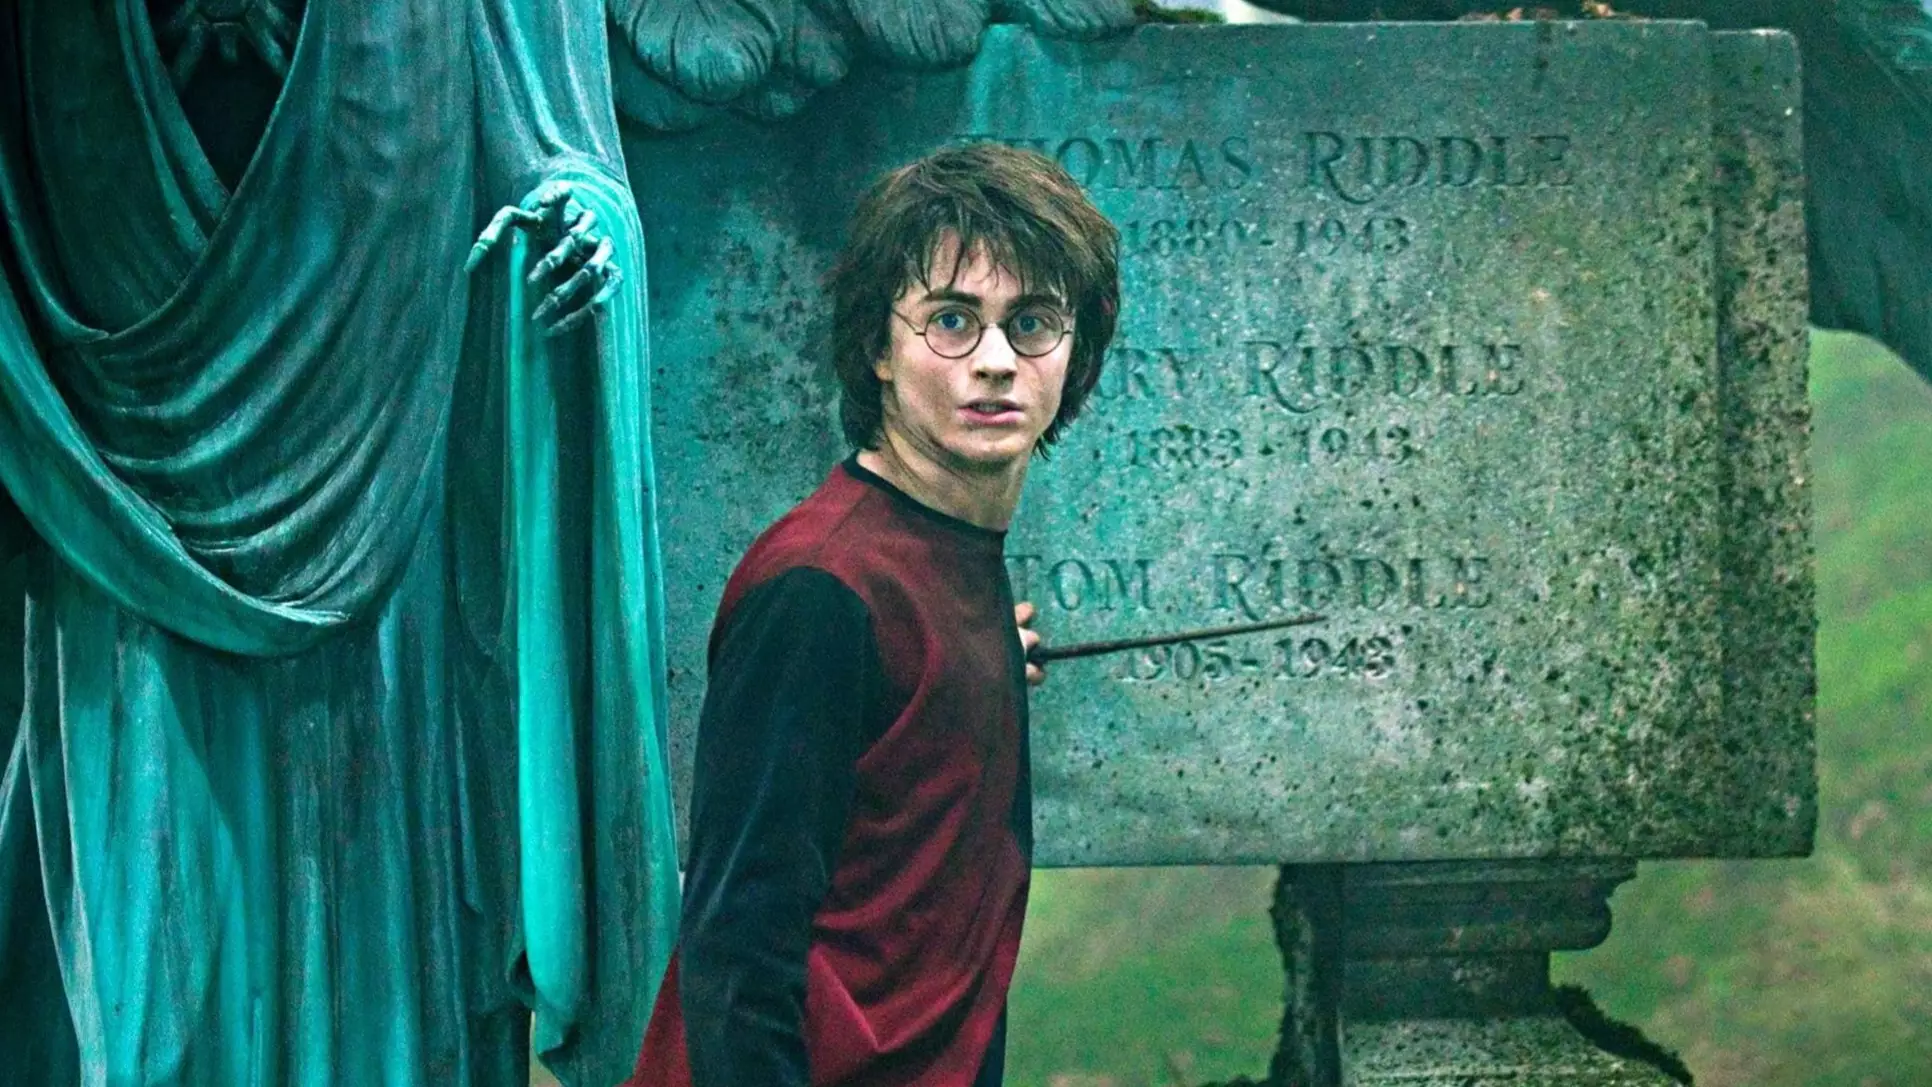 Everyone's Freaking Out Over This Deleted 'Harry Potter' Scene Reappearing